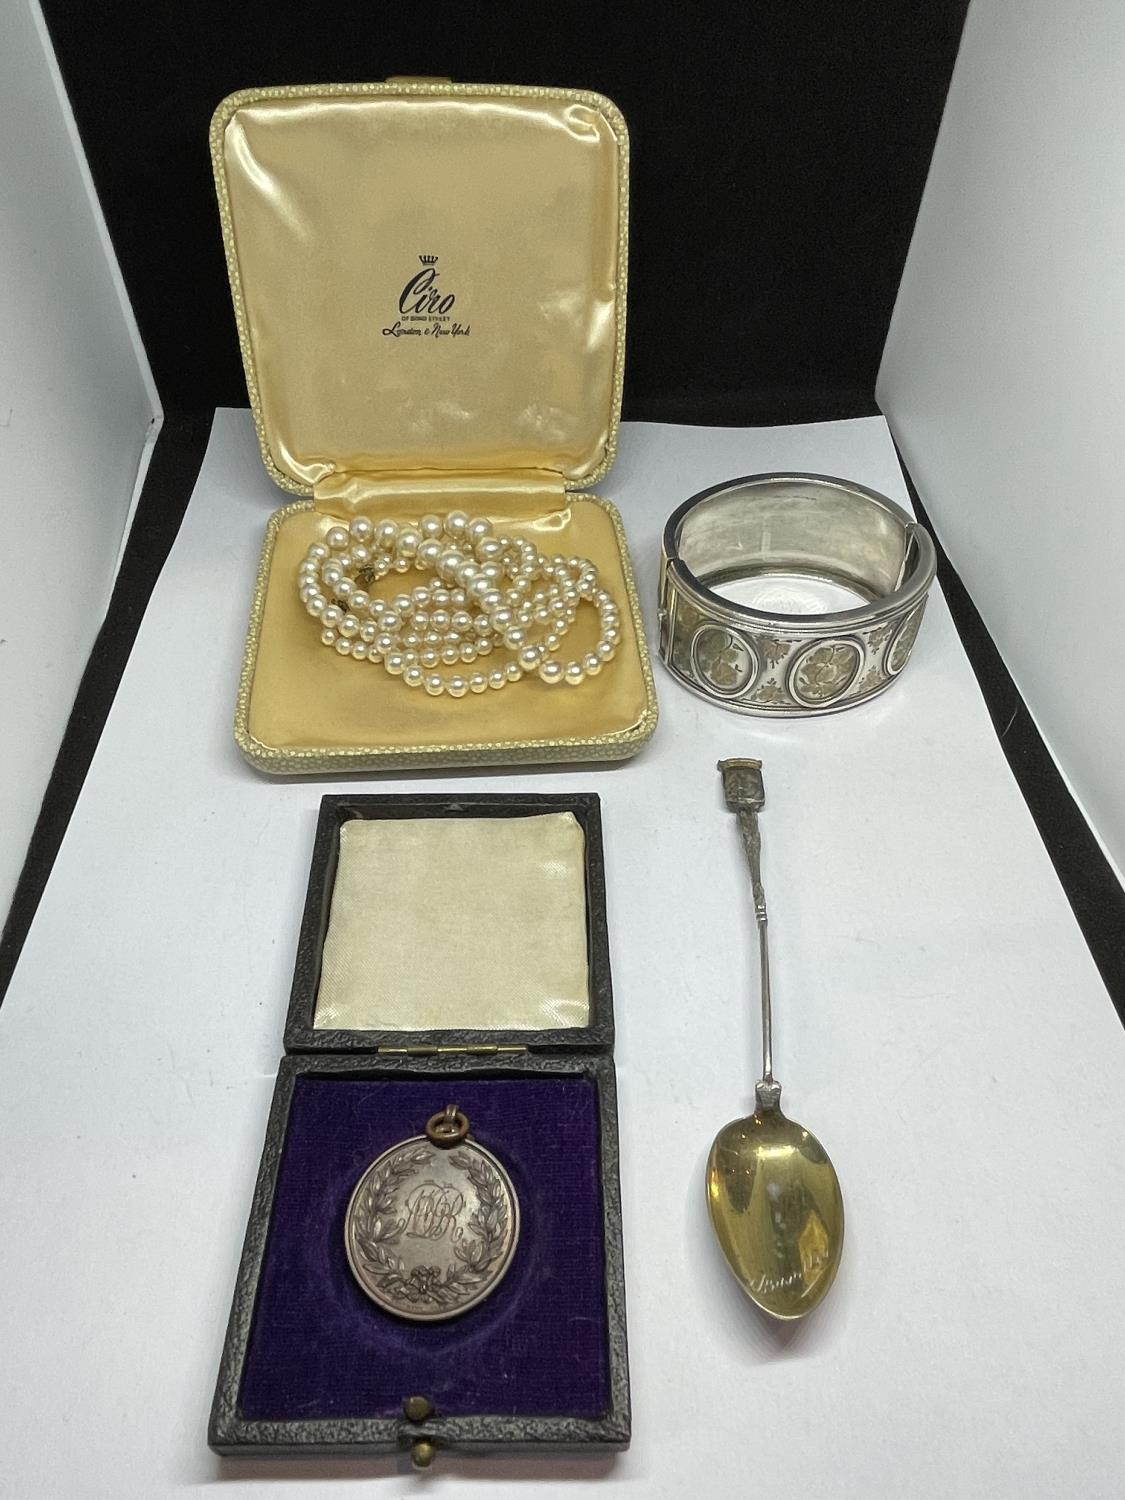 FOUR ITEMS TO INCLUDE A BOXED SET OF CIRO PEARLS, A POSSIBLY SILVER BANGLE, A SPOON AND A BOXED